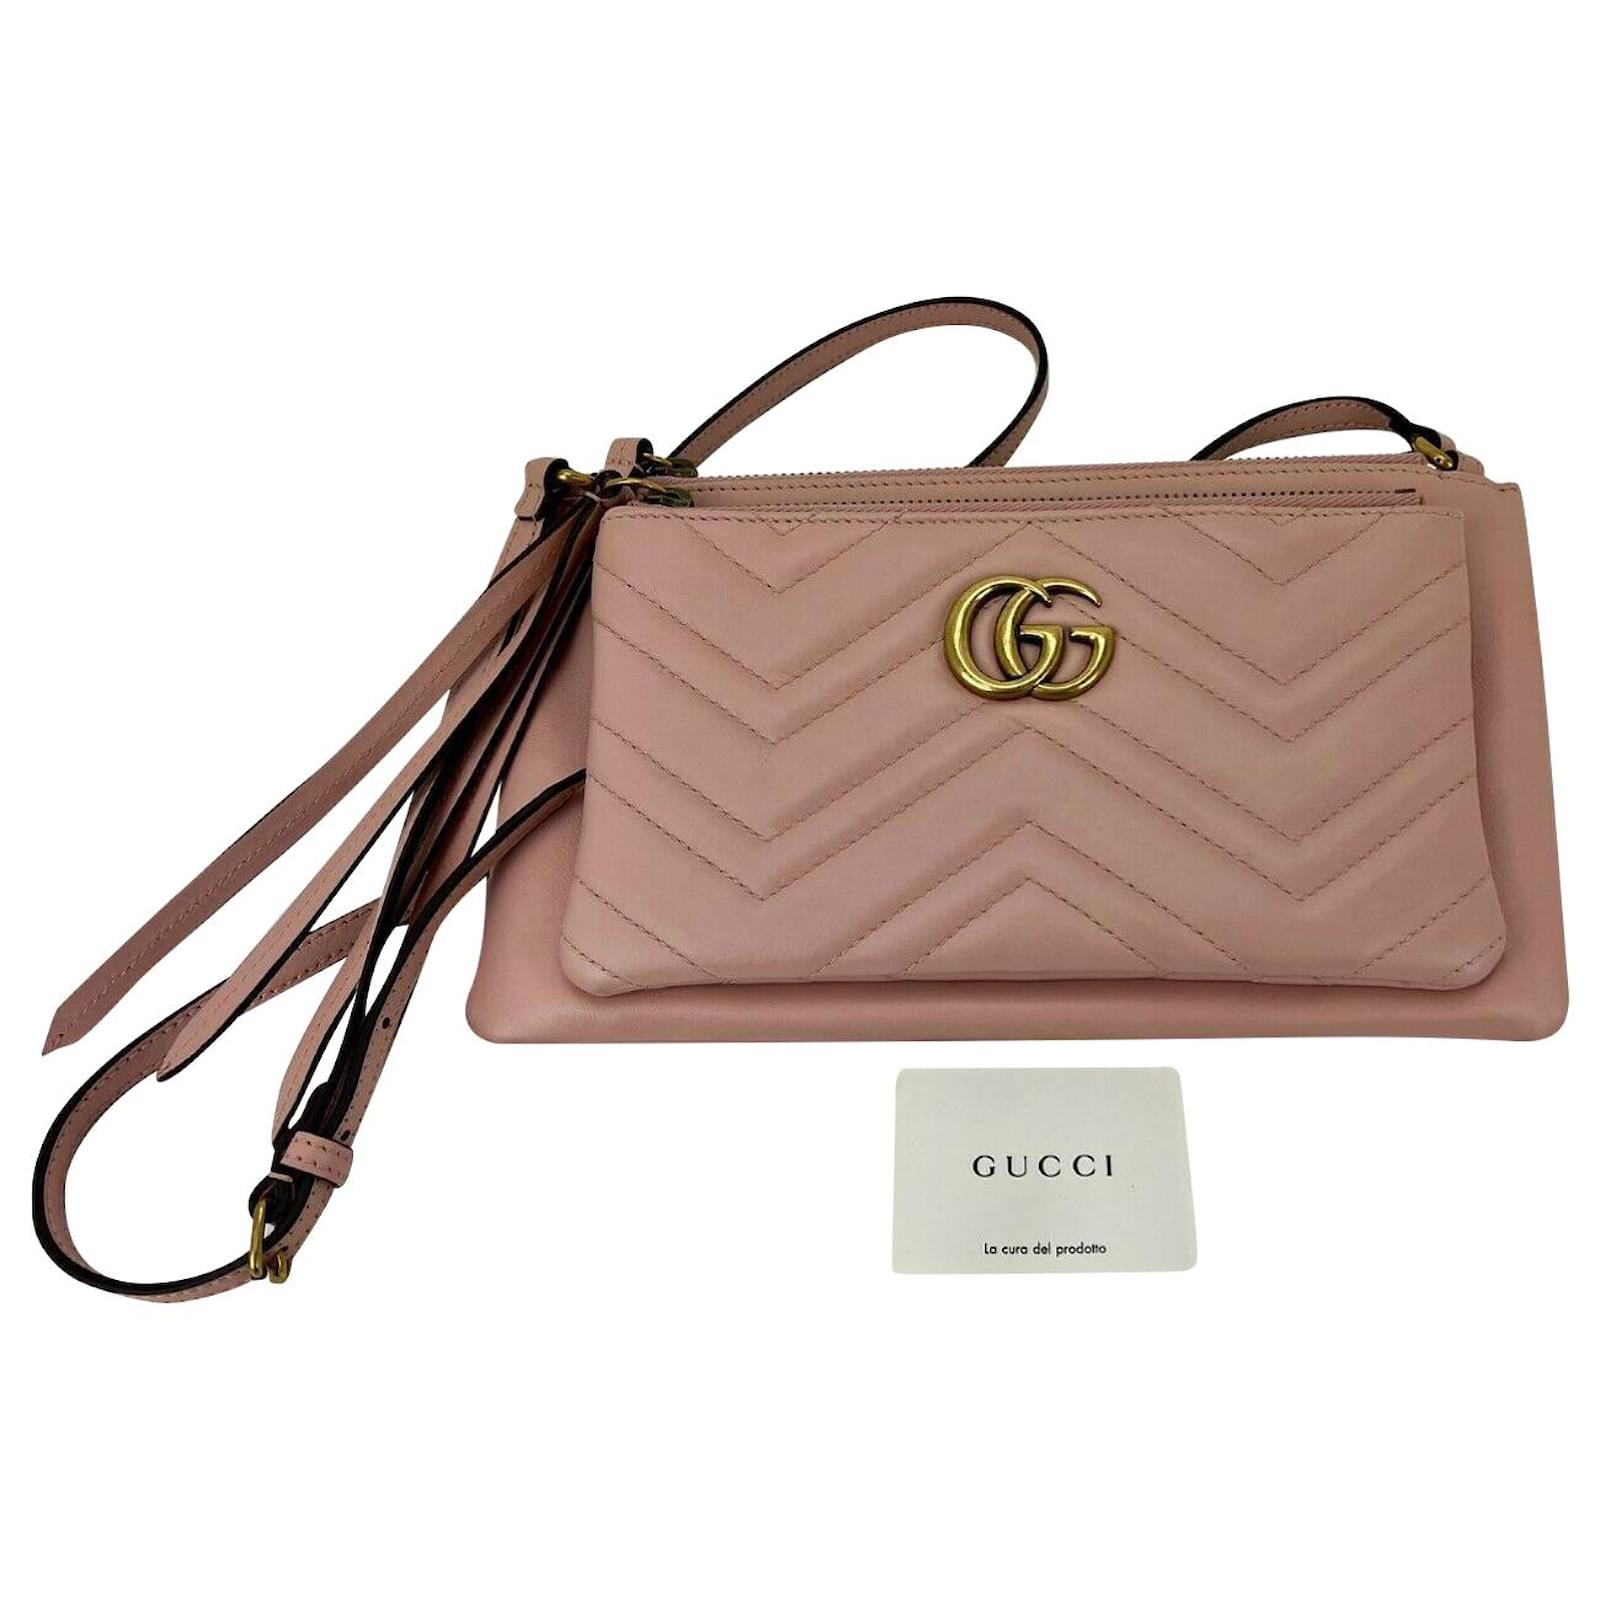 Gucci GG Marmont Matelassé Leather Clutch with Wristlet Strap in Dusty Rose